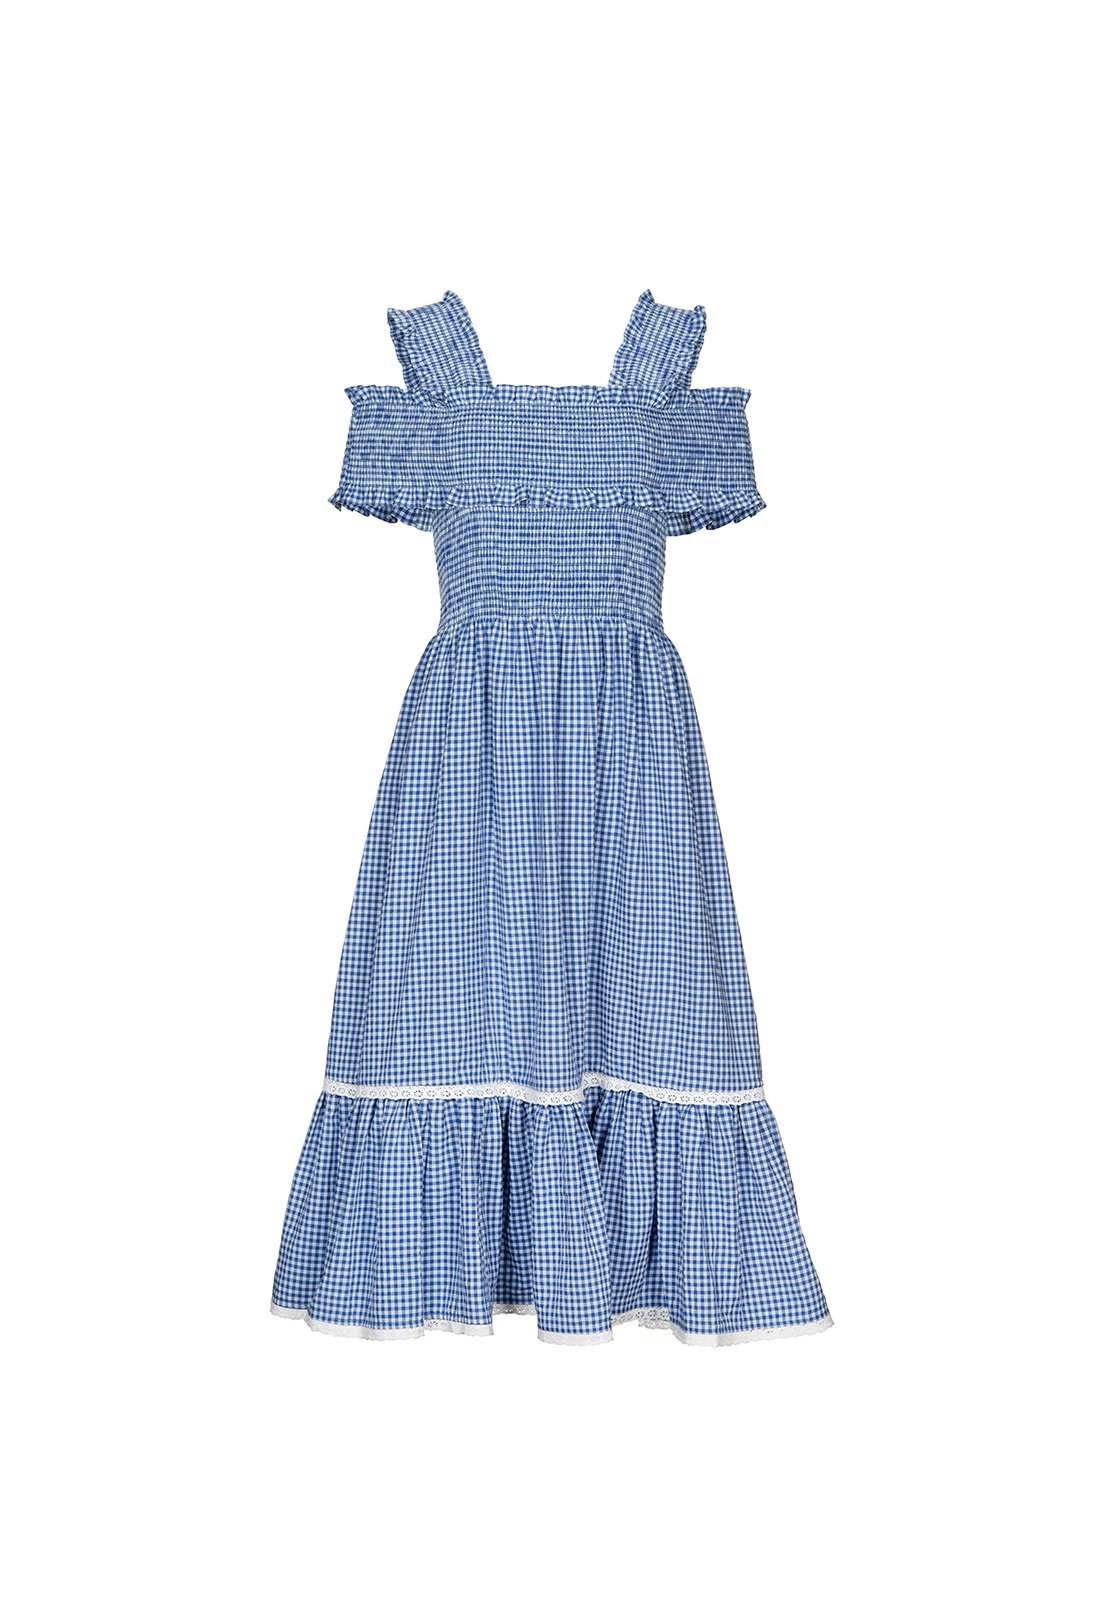 5 Dress Experts Just Shared the 44 Best Summer Frocks | Who What Wear UK